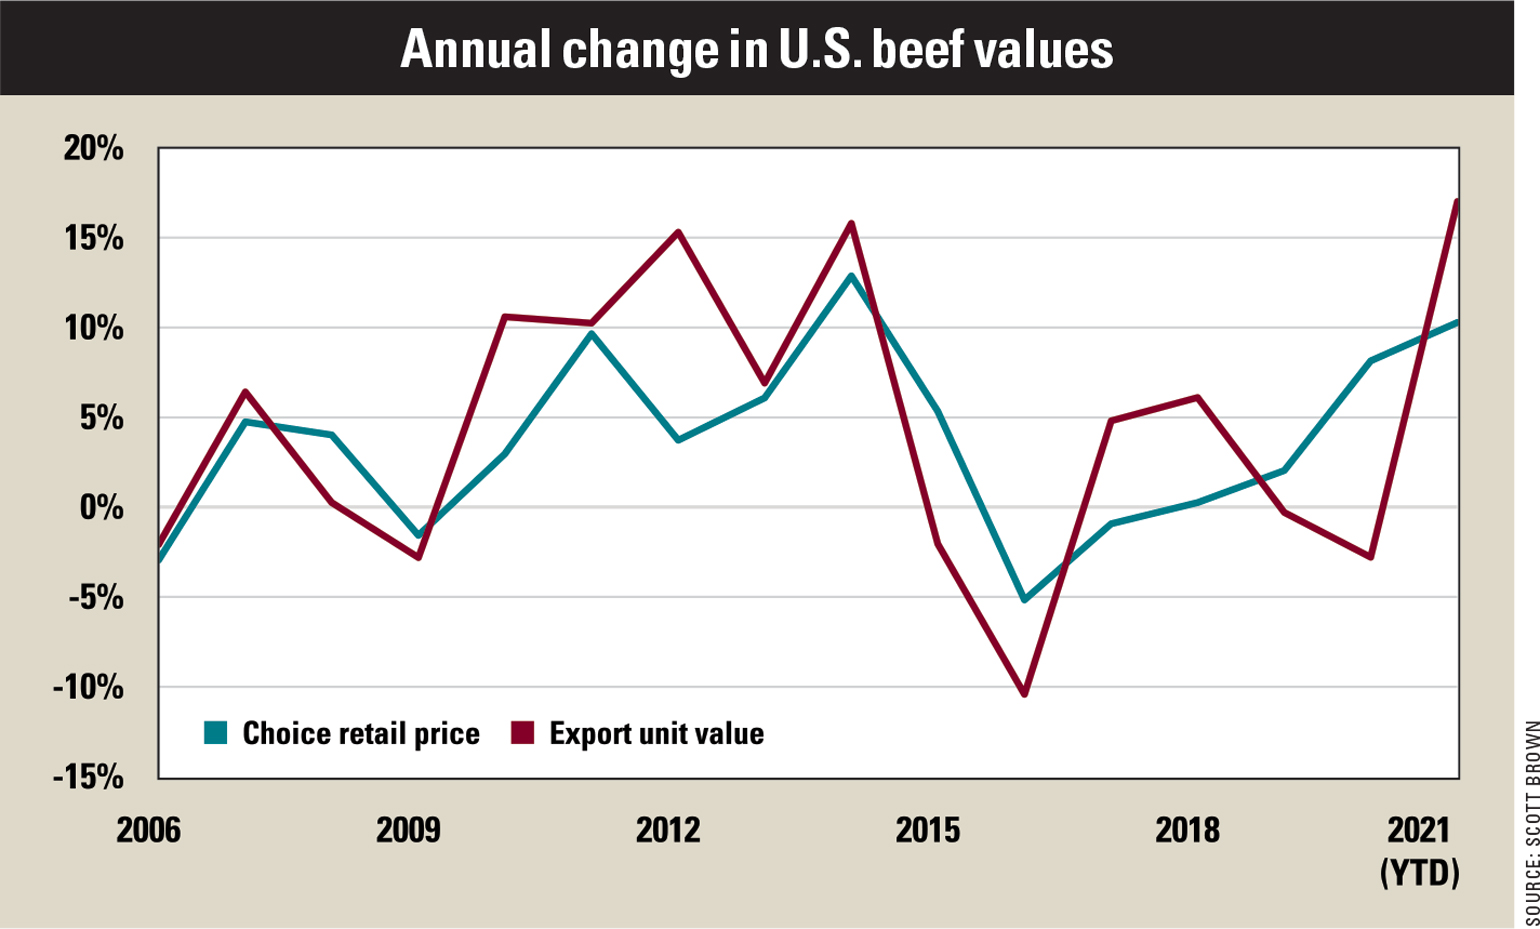 It’s becoming a bidding war for U.S. Beef